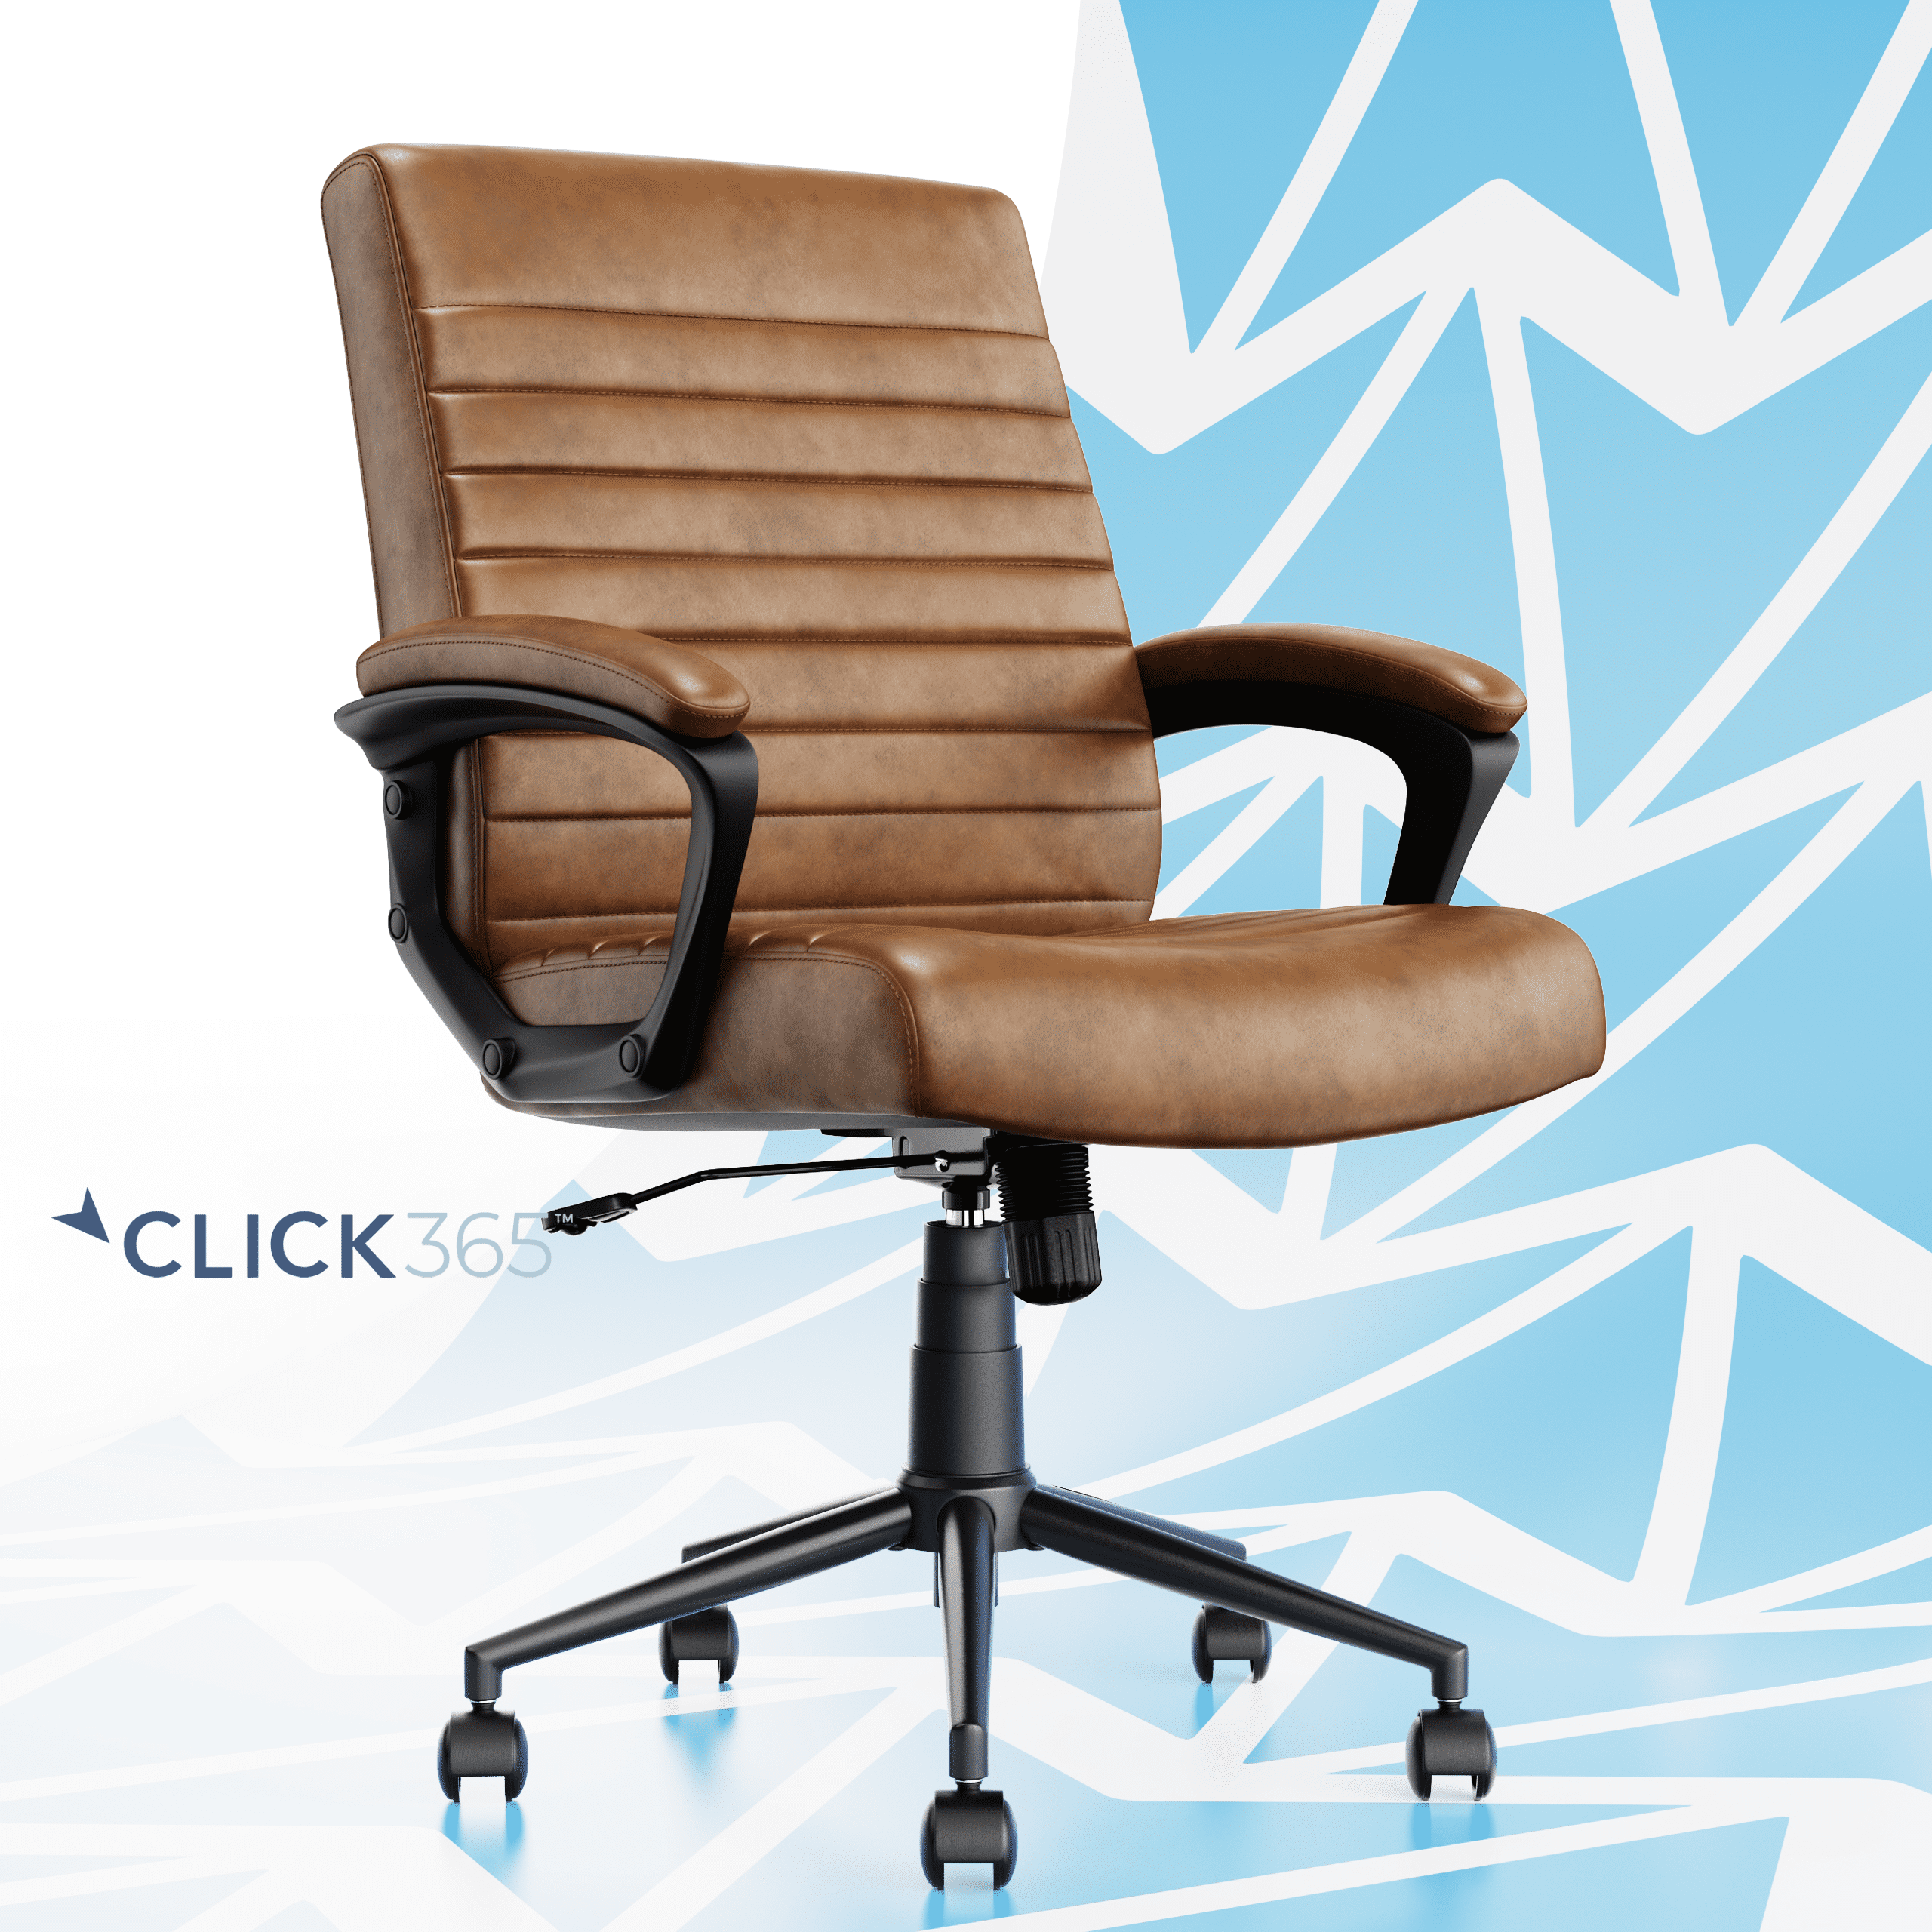 Controversieel ui Kameraad Click 365 Transform 3.0 Extra Comfort Ergonomic Mid Back Channel Stitching  Desk Chair, with padded armrests, Adjustable-Height, Tilt, Lumbar Support,  360-Degree Swivel, Bonded leather, Cognac - Walmart.com